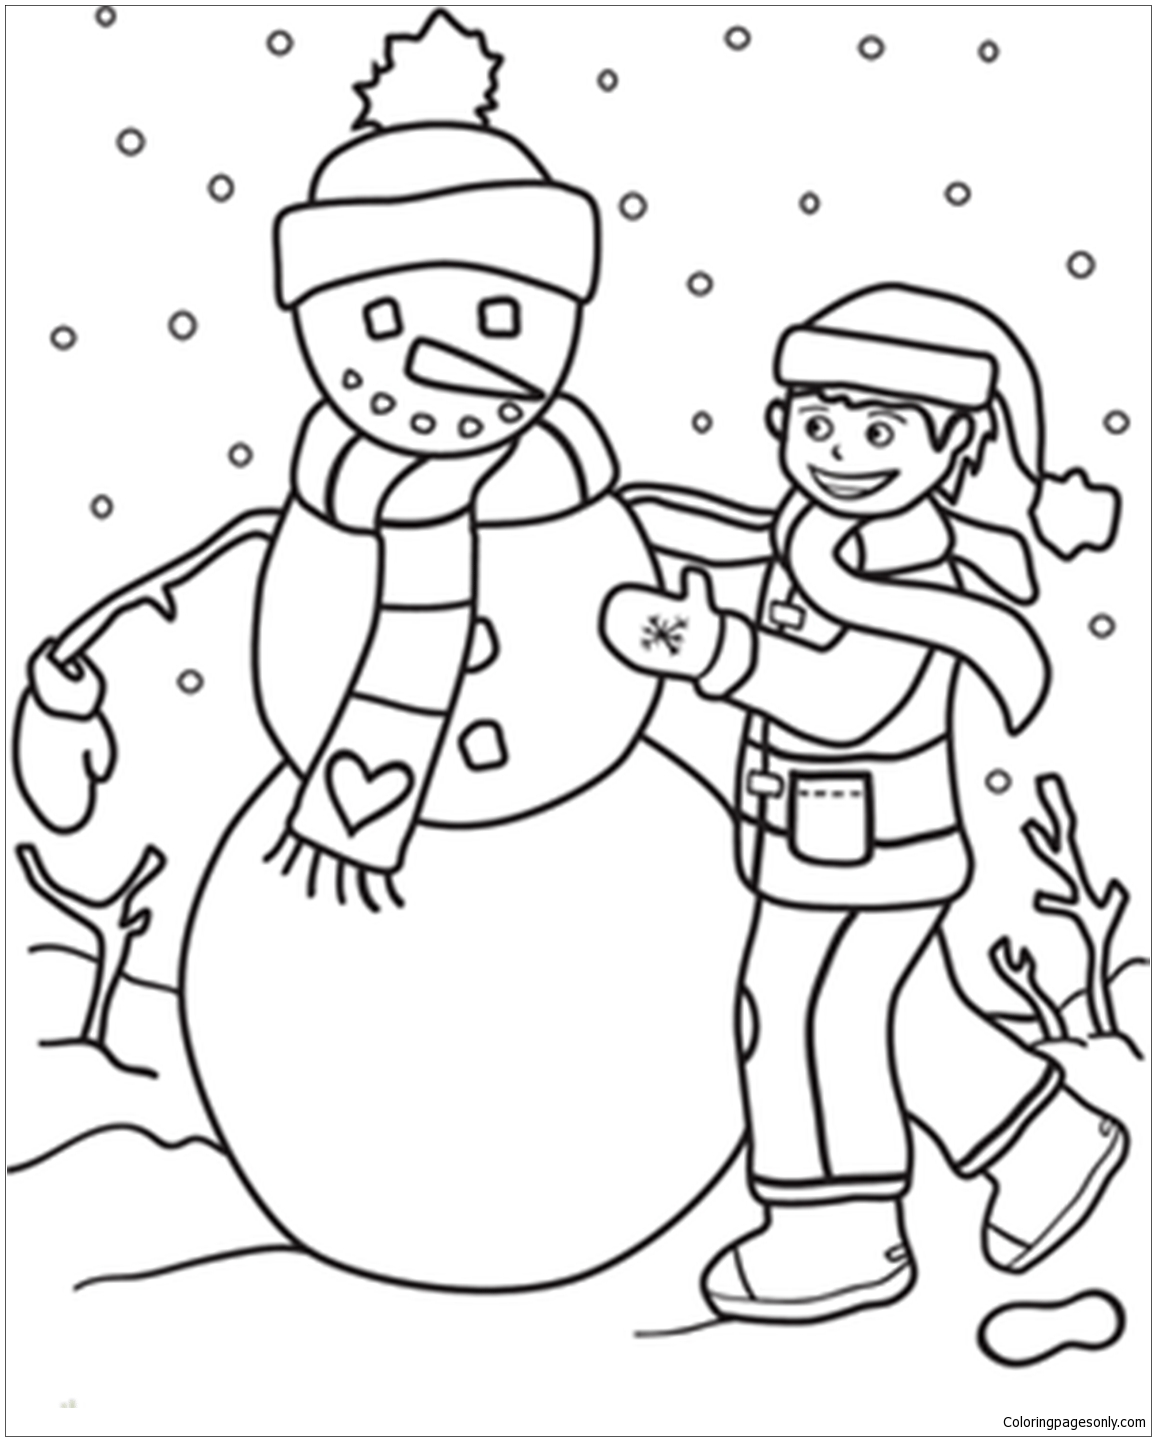 A Boy Making Snowman Coloring Pages - Winter Coloring Pages - Coloring